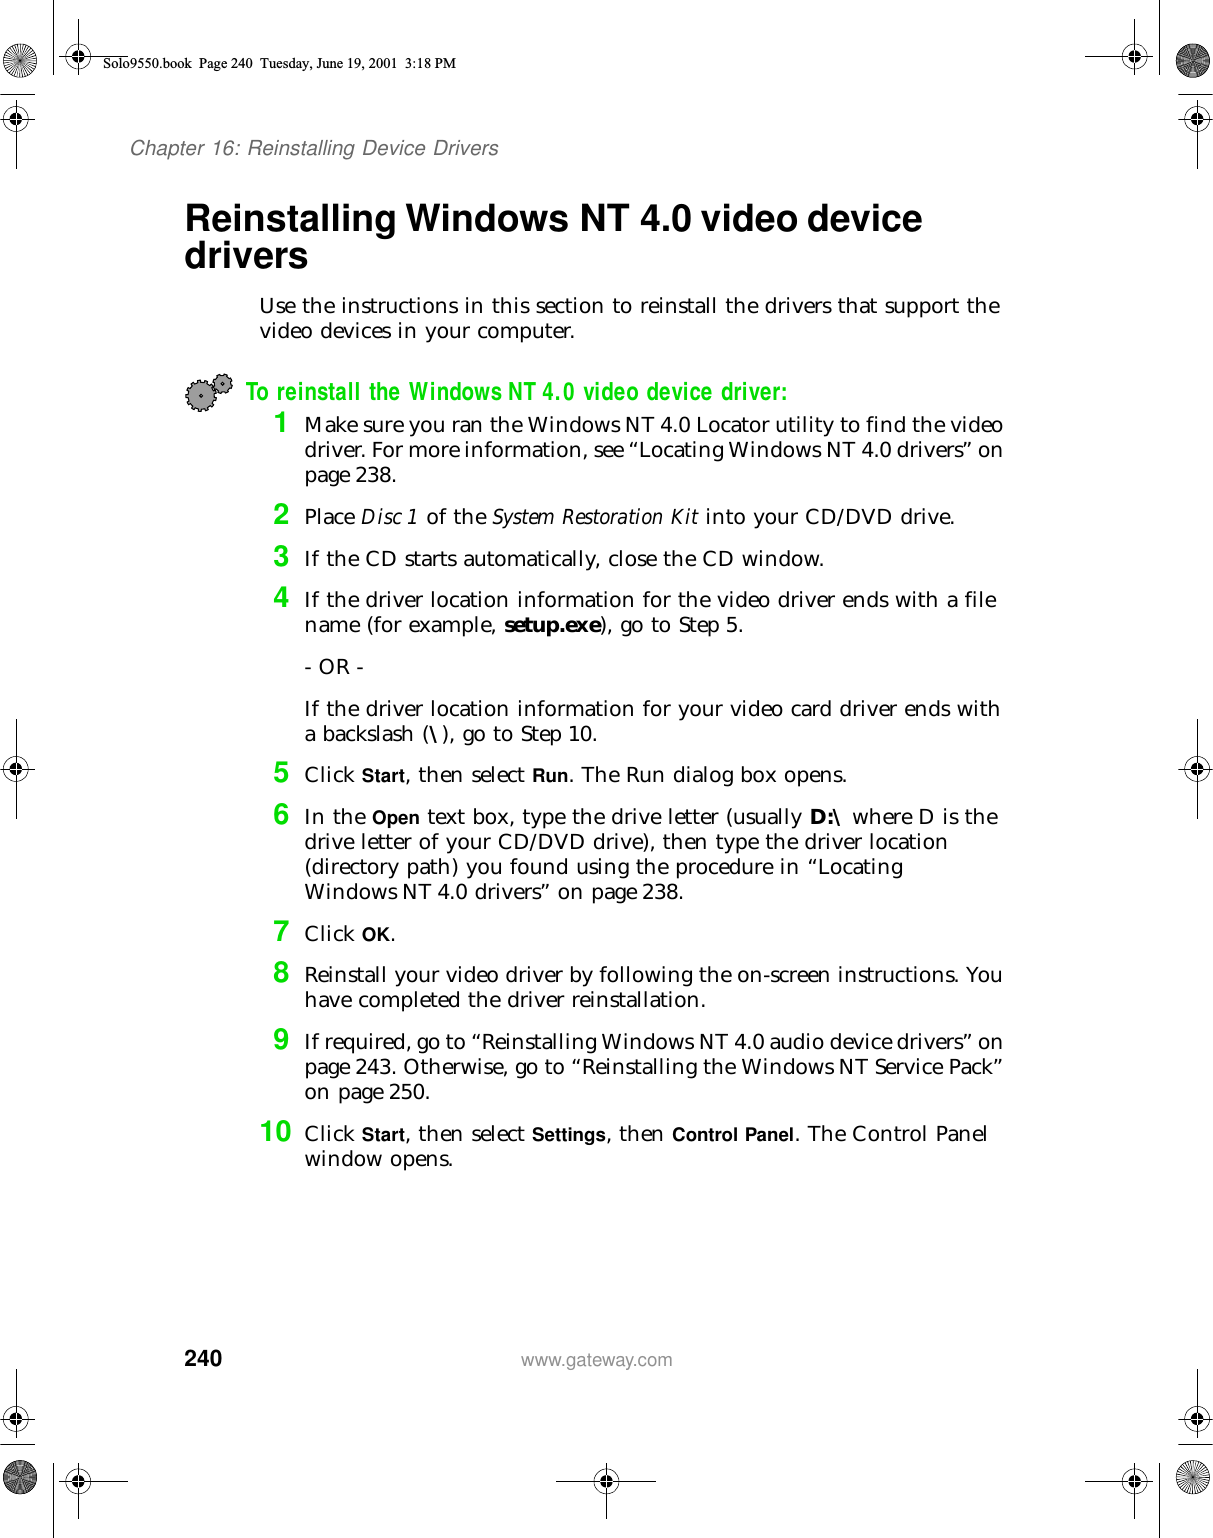 240Chapter 16: Reinstalling Device Driverswww.gateway.comReinstalling Windows NT 4.0 video device driversUse the instructions in this section to reinstall the drivers that support the video devices in your computer.To reinstall the Windows NT 4.0 video device driver:1Make sure you ran the Windows NT 4.0 Locator utility to find the video driver. For more information, see “Locating Windows NT 4.0 drivers” on page 238.2Place Disc 1 of the System Restoration Kit into your CD/DVD drive.3If the CD starts automatically, close the CD window.4If the driver location information for the video driver ends with a file name (for example, setup.exe), go to Step 5.- OR -If the driver location information for your video card driver ends with a backslash (\), go to Step 10.5Click Start, then select Run. The Run dialog box opens.6In the Open text box, type the drive letter (usually D:\ where D is the drive letter of your CD/DVD drive), then type the driver location (directory path) you found using the procedure in “Locating Windows NT 4.0 drivers” on page 238.7Click OK.8Reinstall your video driver by following the on-screen instructions. You have completed the driver reinstallation.9If required, go to “Reinstalling Windows NT 4.0 audio device drivers” on page 243. Otherwise, go to “Reinstalling the Windows NT Service Pack” on page 250.10 Click Start, then select Settings, then Control Panel. The Control Panel window opens.Solo9550.book Page 240 Tuesday, June 19, 2001 3:18 PM